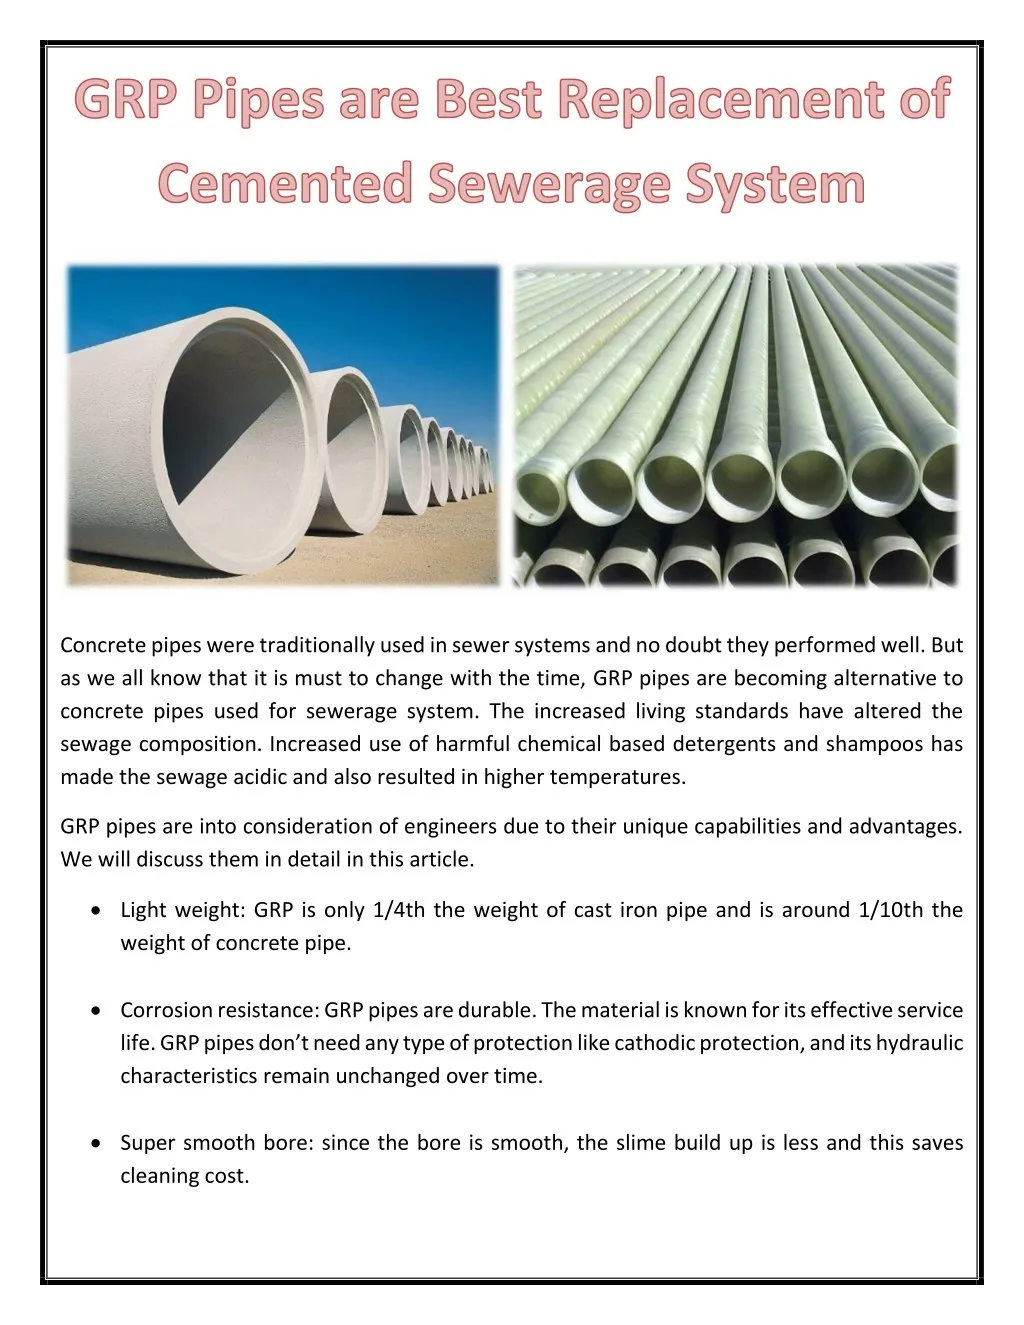 concrete pipes were traditionally used in sewer